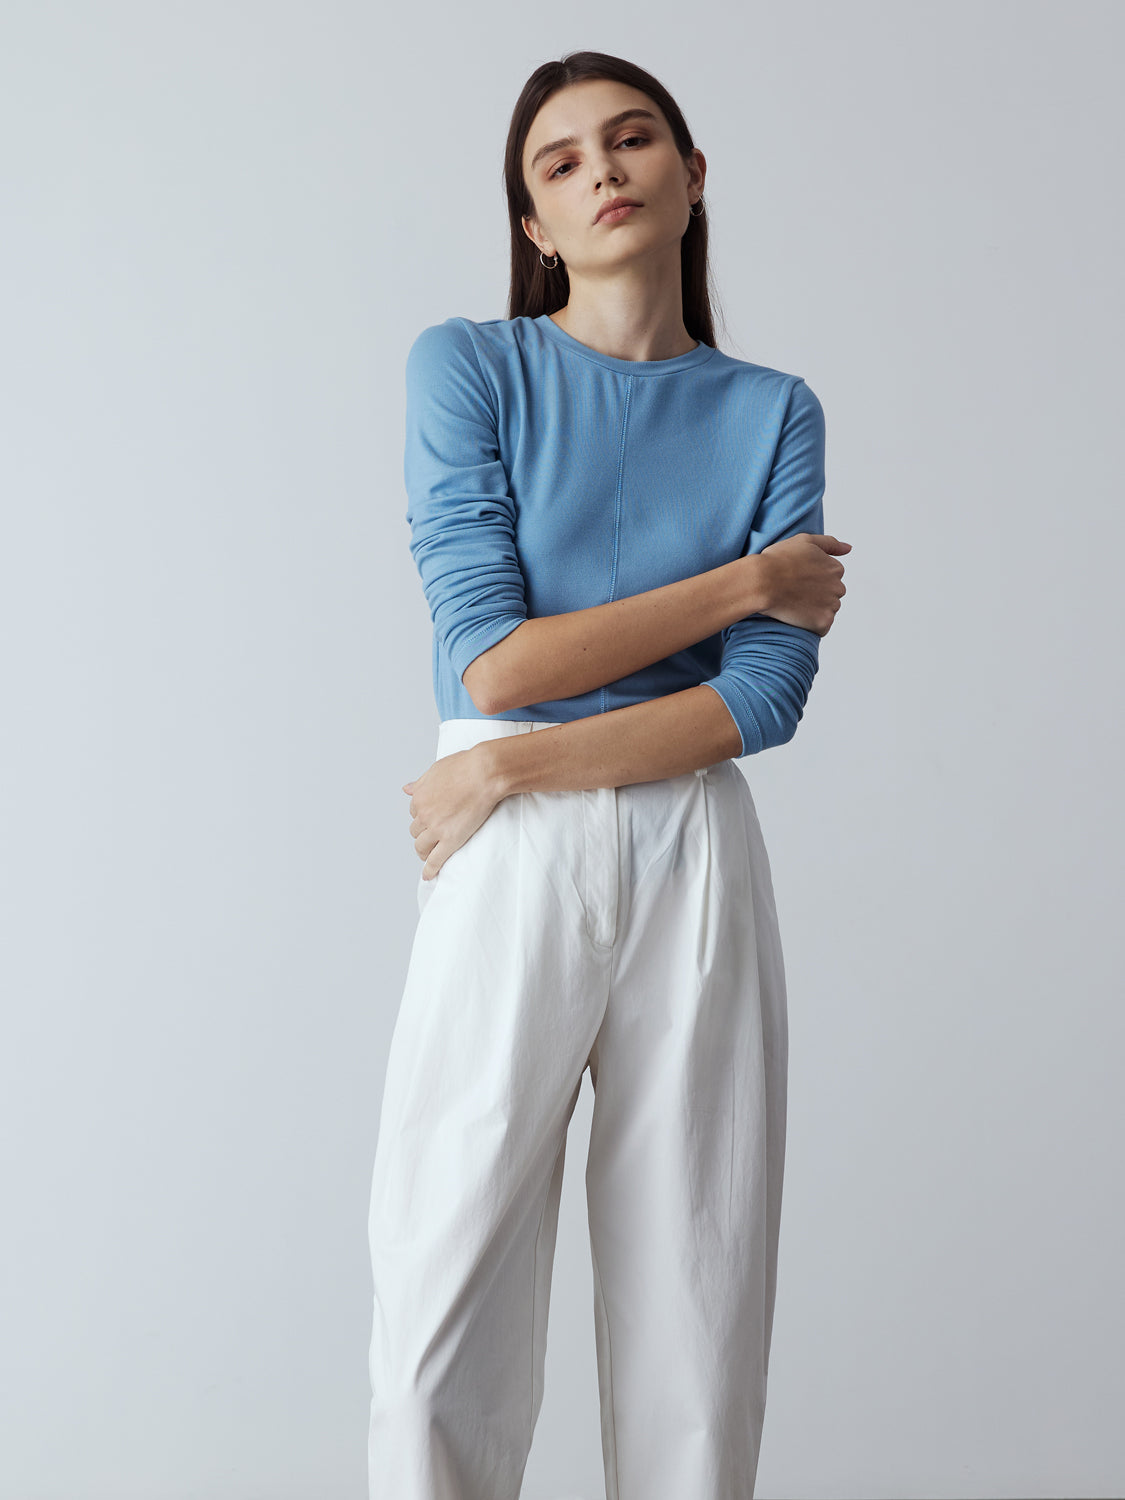 Model is wearing the Cotton Tailored Trousers in White, which comes high-waisted with slash pockets at the sides, a concealed zip-fly closure and pleated details. Worn with the Fitted Long Sleeve T-Shirt in Blue and metallic silver heels.